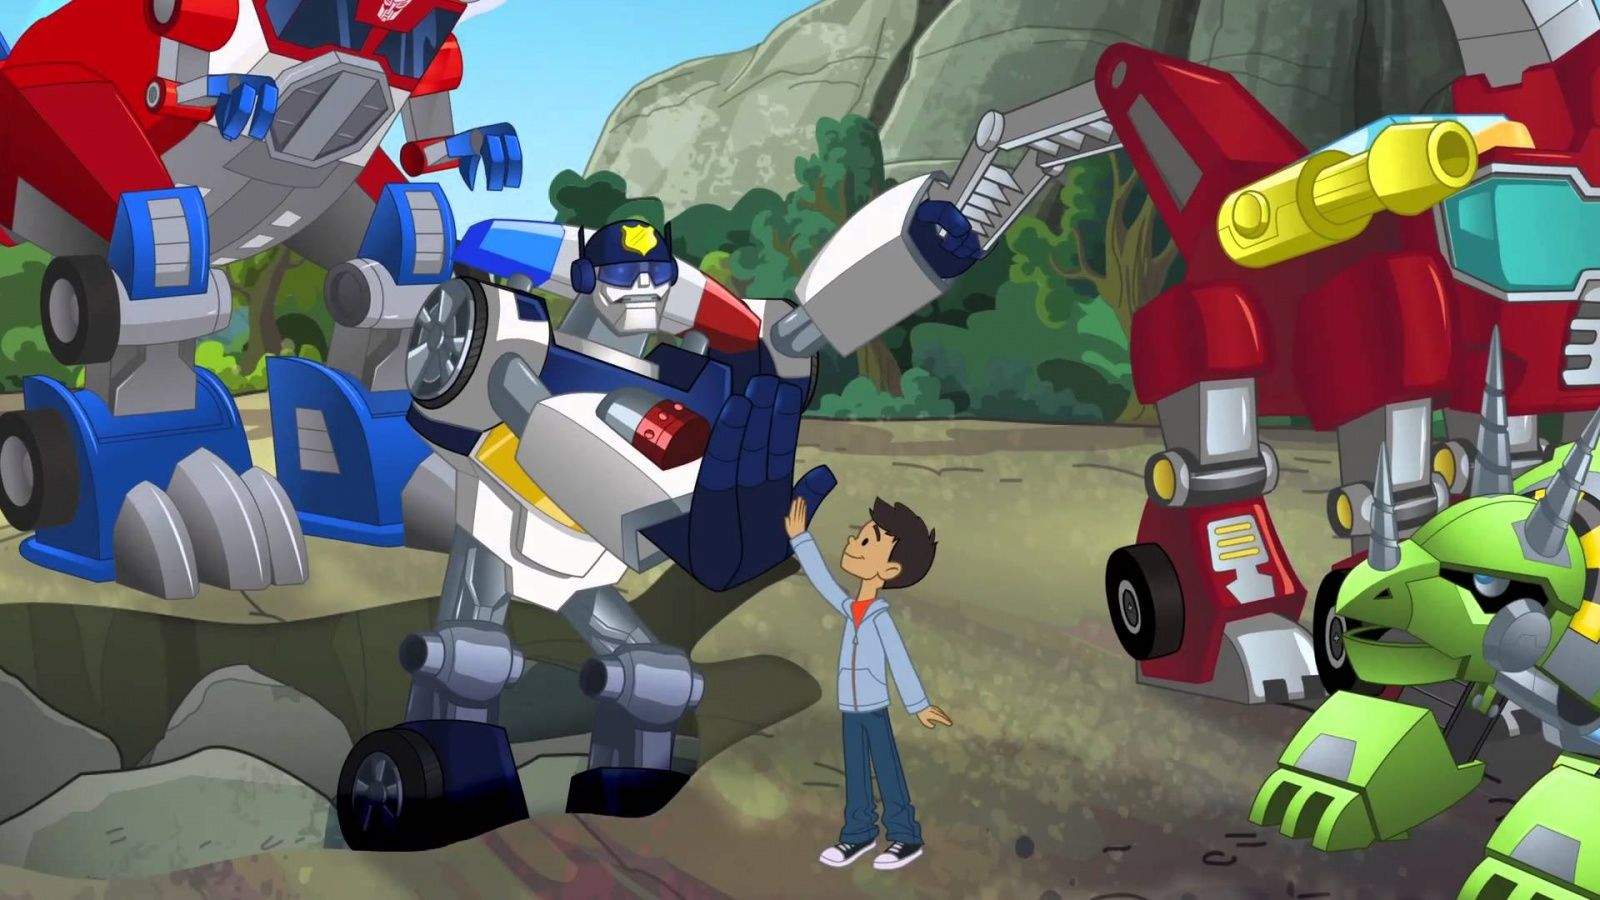 On the other end of the gritty realism spectrum is this cute kids’ show based on the Transformers that takes a design cue from Marvel’s Super Hero Squad, with squatty, big-footed characters interacting with each other in seriously family-friendly ways. Rescue Bots follows the adventures of the Autobots as they help their young friends learn about hazards and safety. Seasons one and two are both available on Netflix until February, while a third season has been announced.  If you’ve got little ones, this is a great addition to their screen time.  
Photo: Hasbro Studios